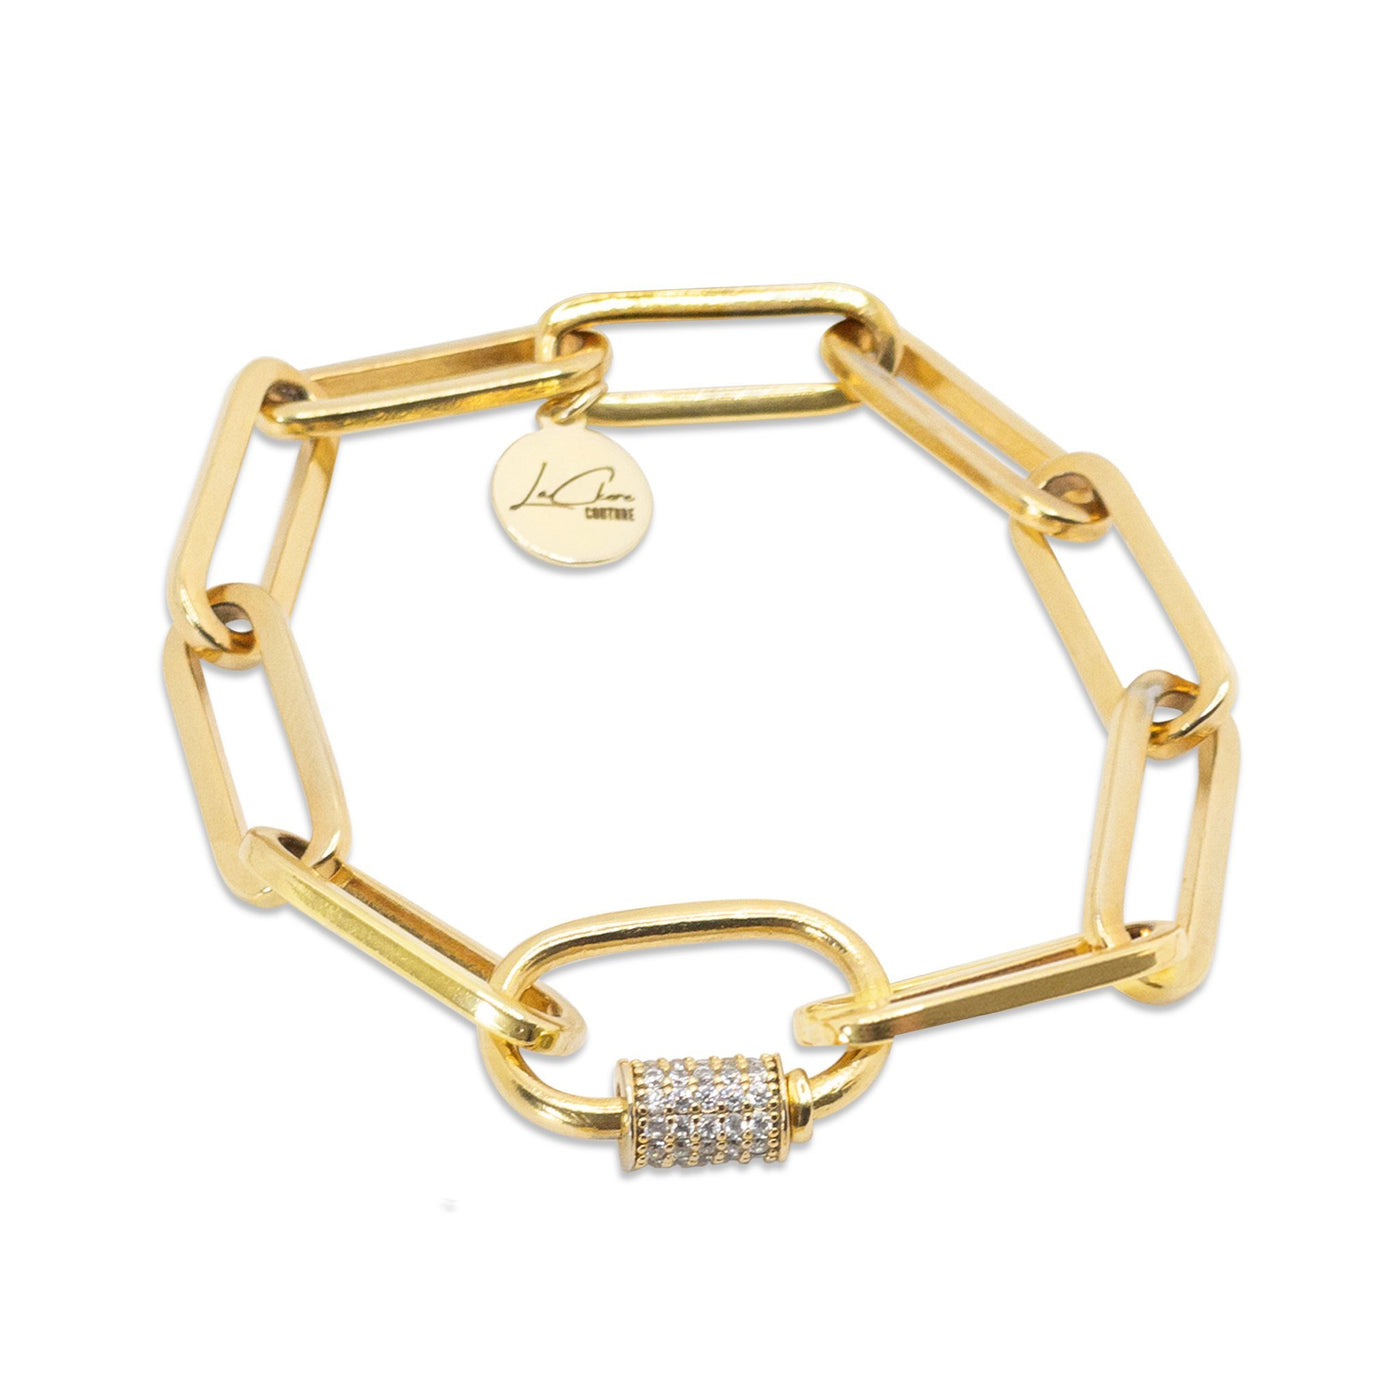 Throwback Crystal Link Charm Bracelet LaCkore Couture